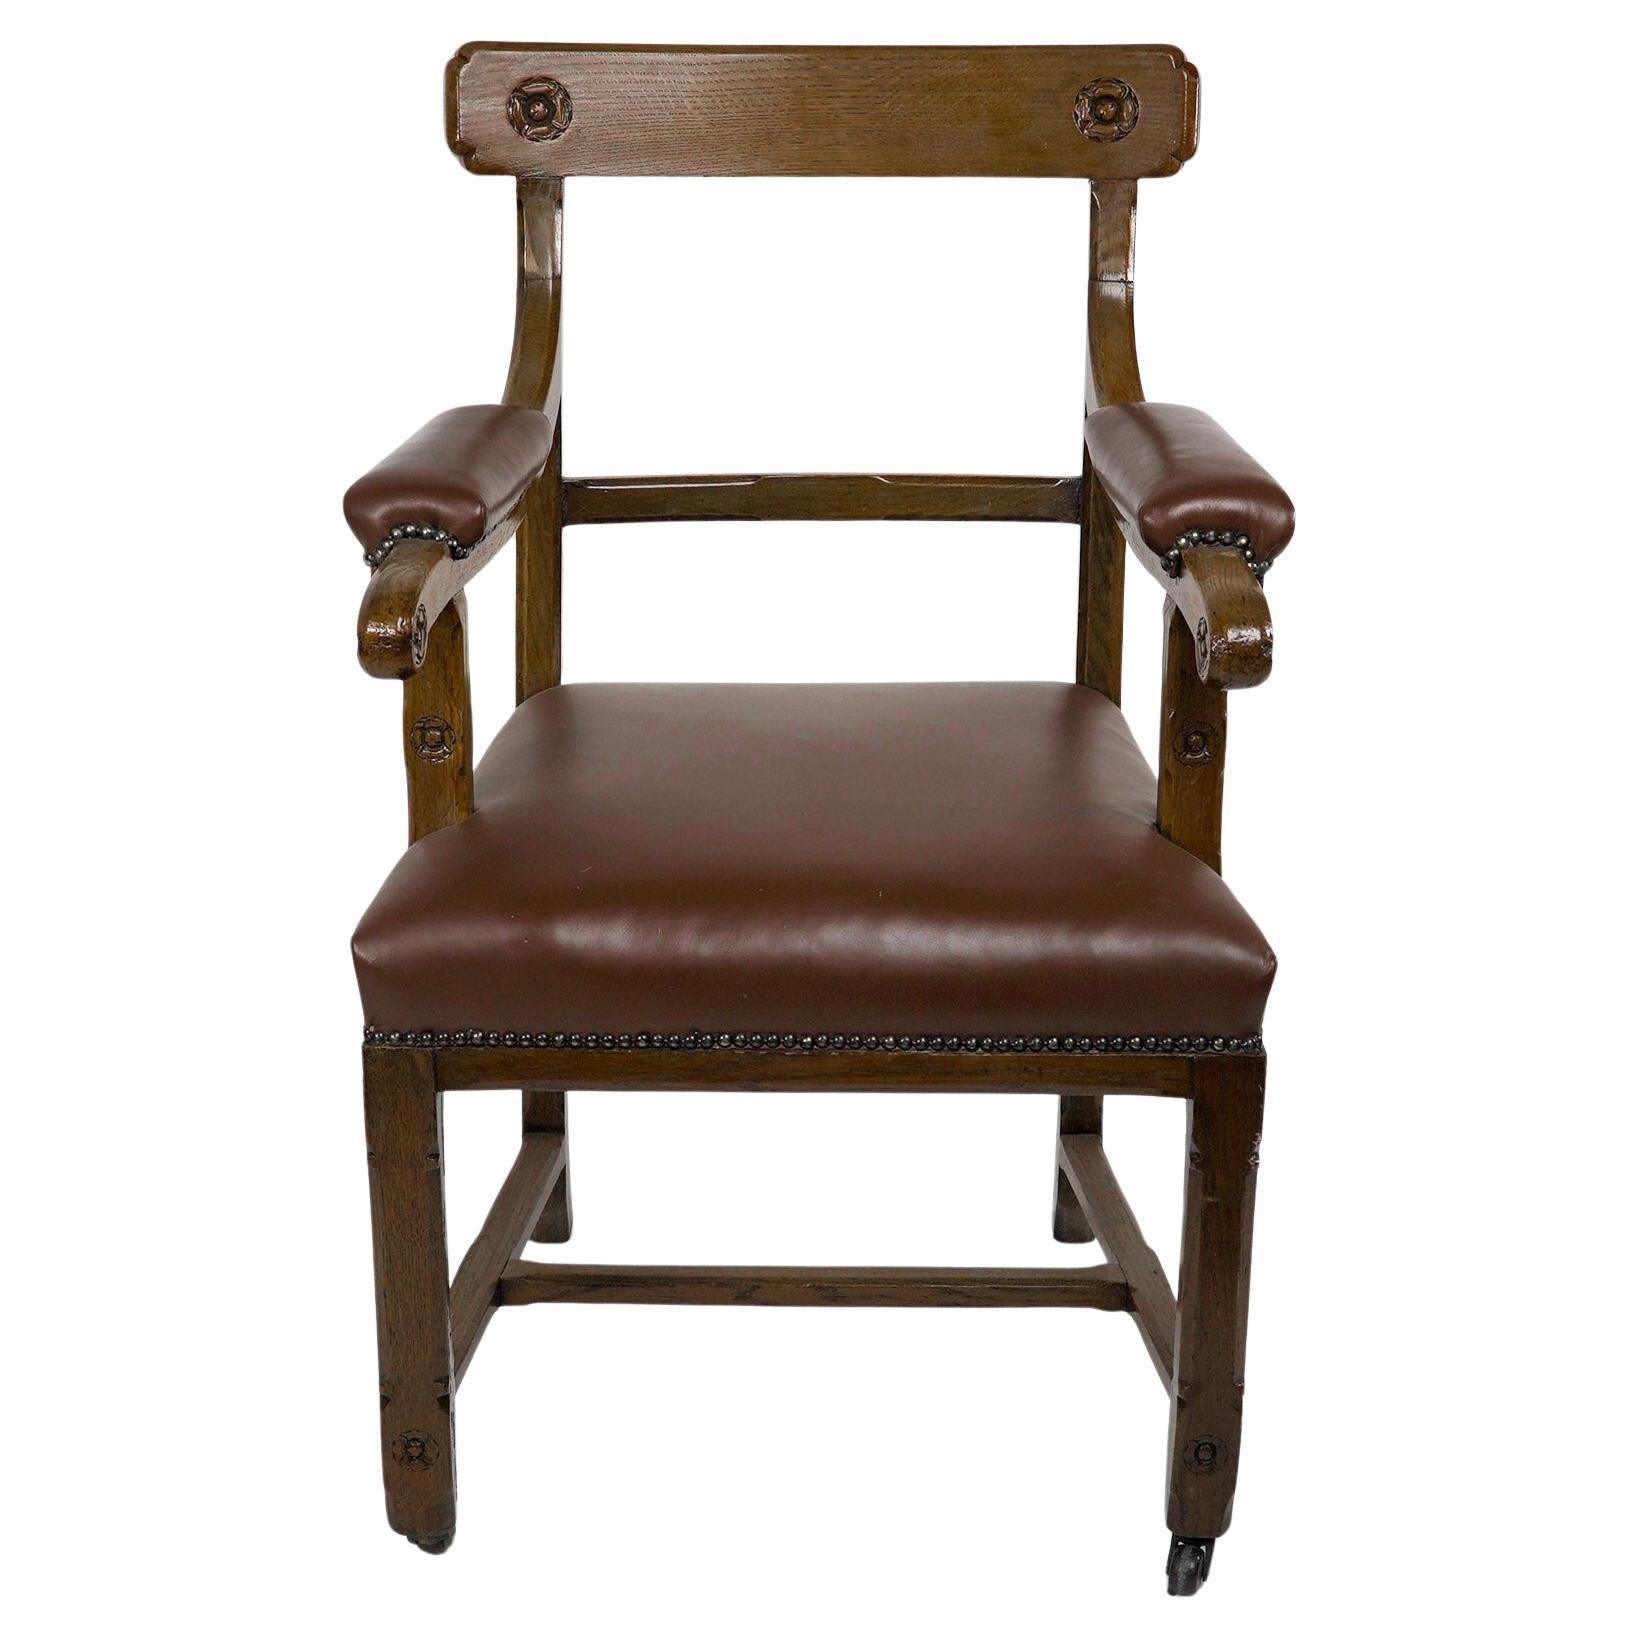 A W N Pugin, probably made by Gillows of Lancaster for the House of Lords London. A Gothic Revival oak armchair with carved rosettes to the headrest, and each side of the arms, and unusual to this model there are two small carved rosettes below the